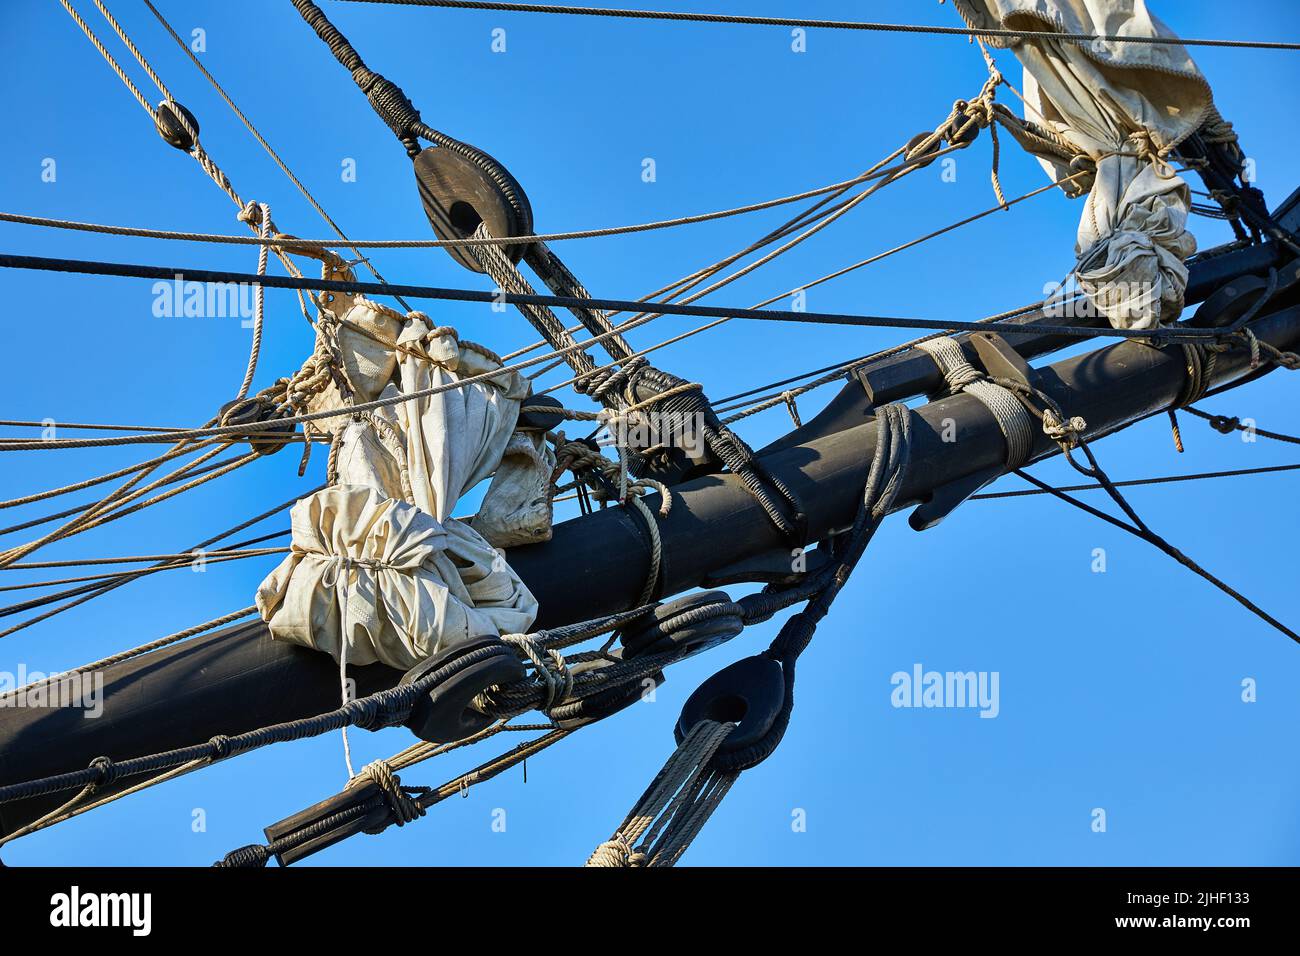 Abtract image of a bowsprit of a  square rigged ship Stock Photo